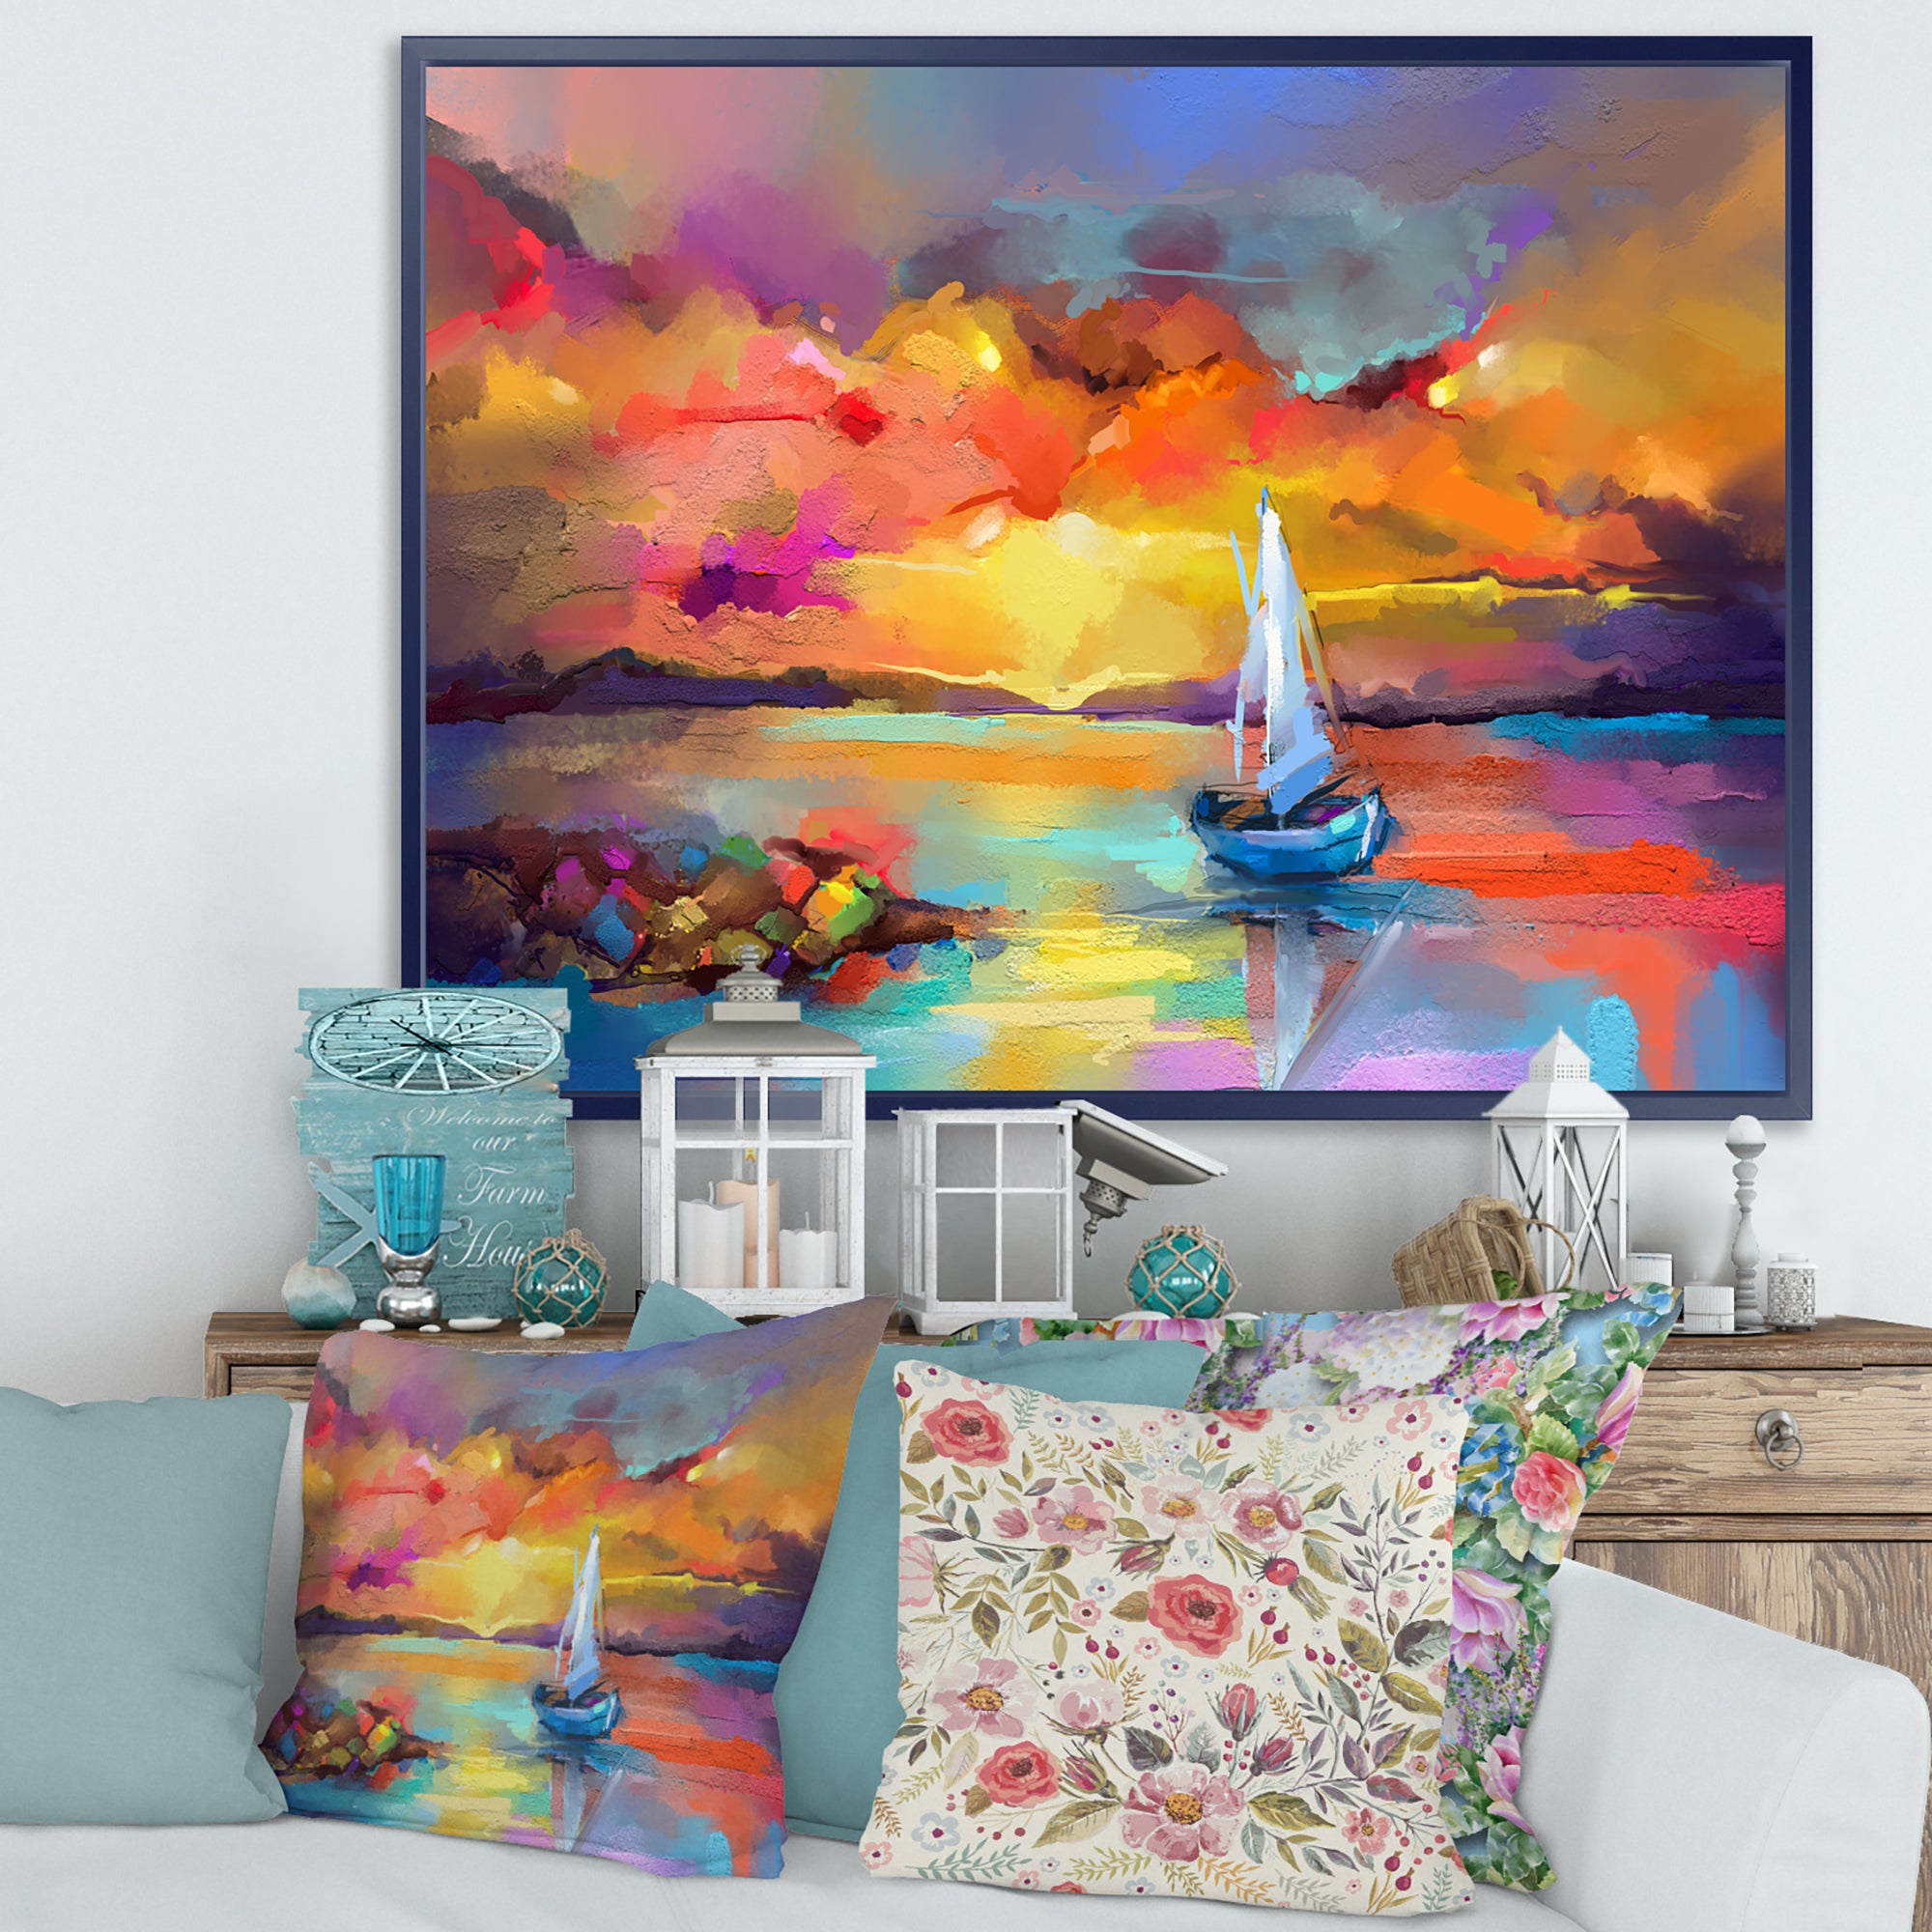 Sunset Painting With Colorful Reflections II Wall Art